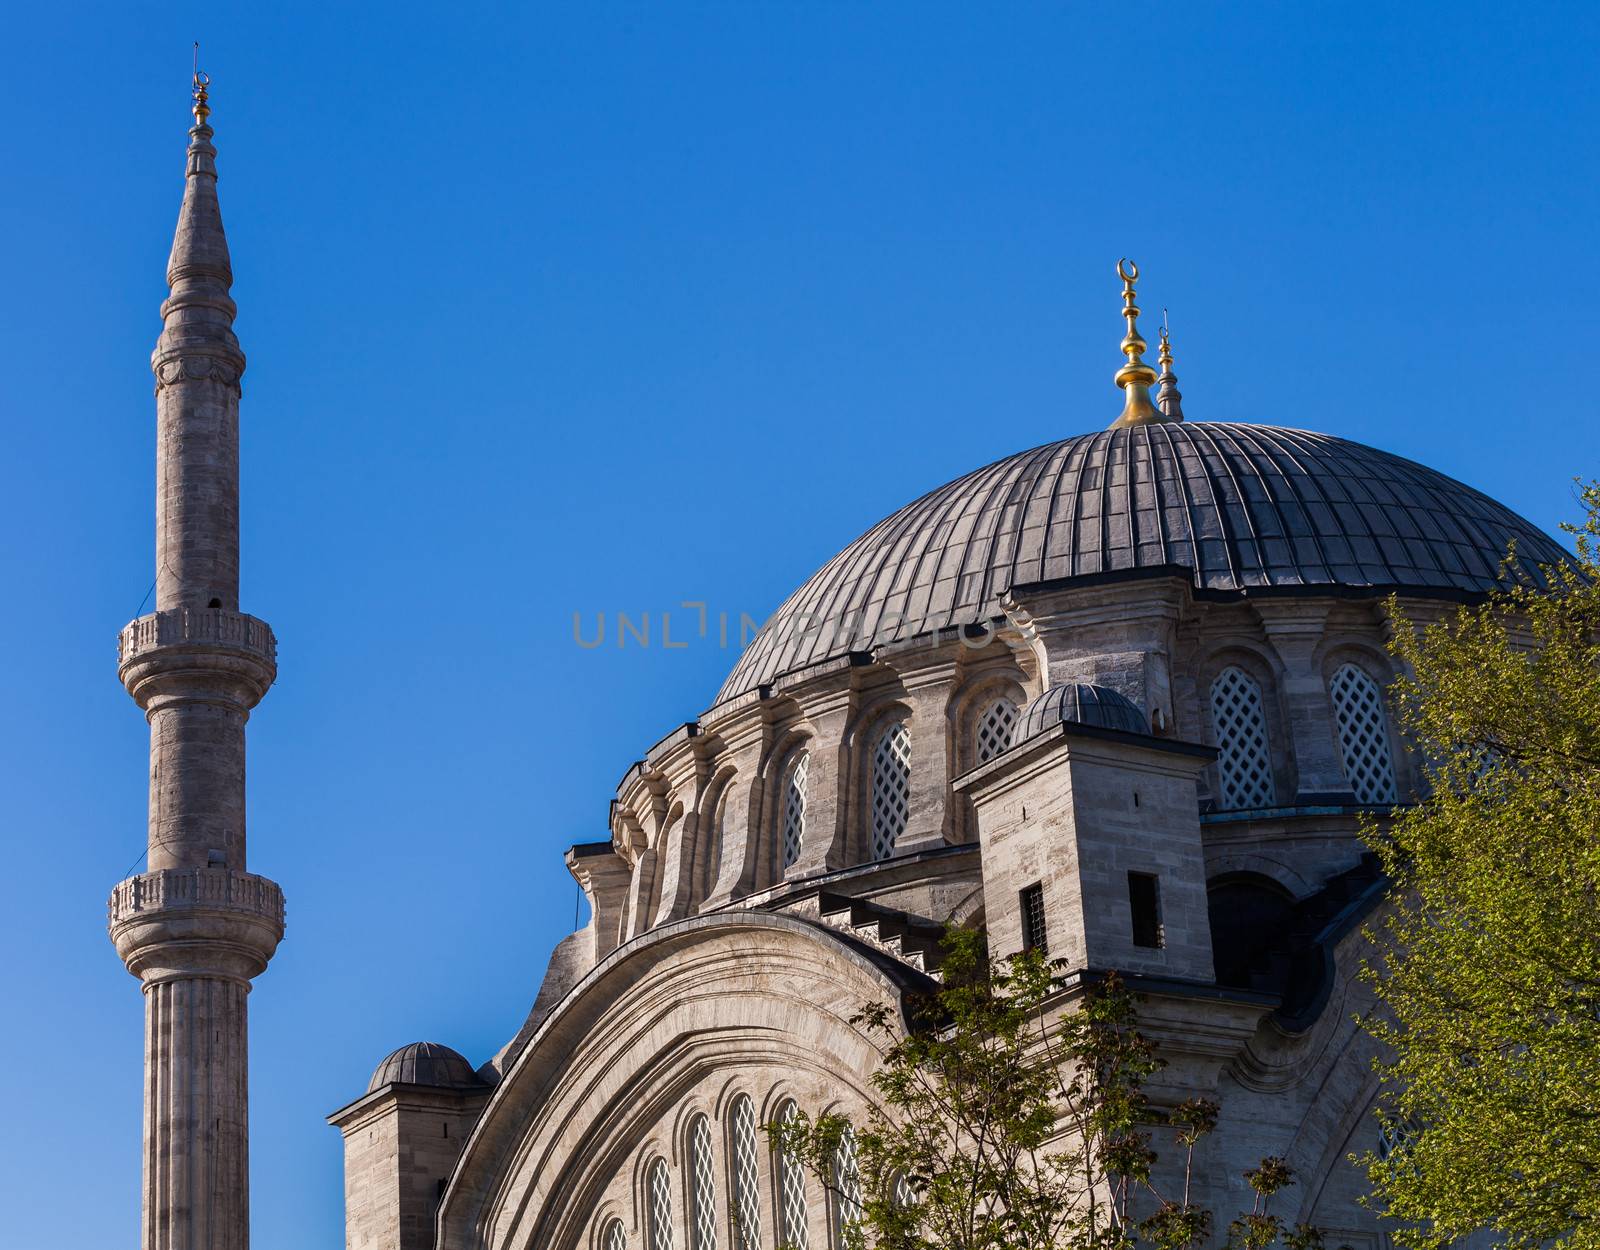 Dome of the Blue Mosque by Creatista